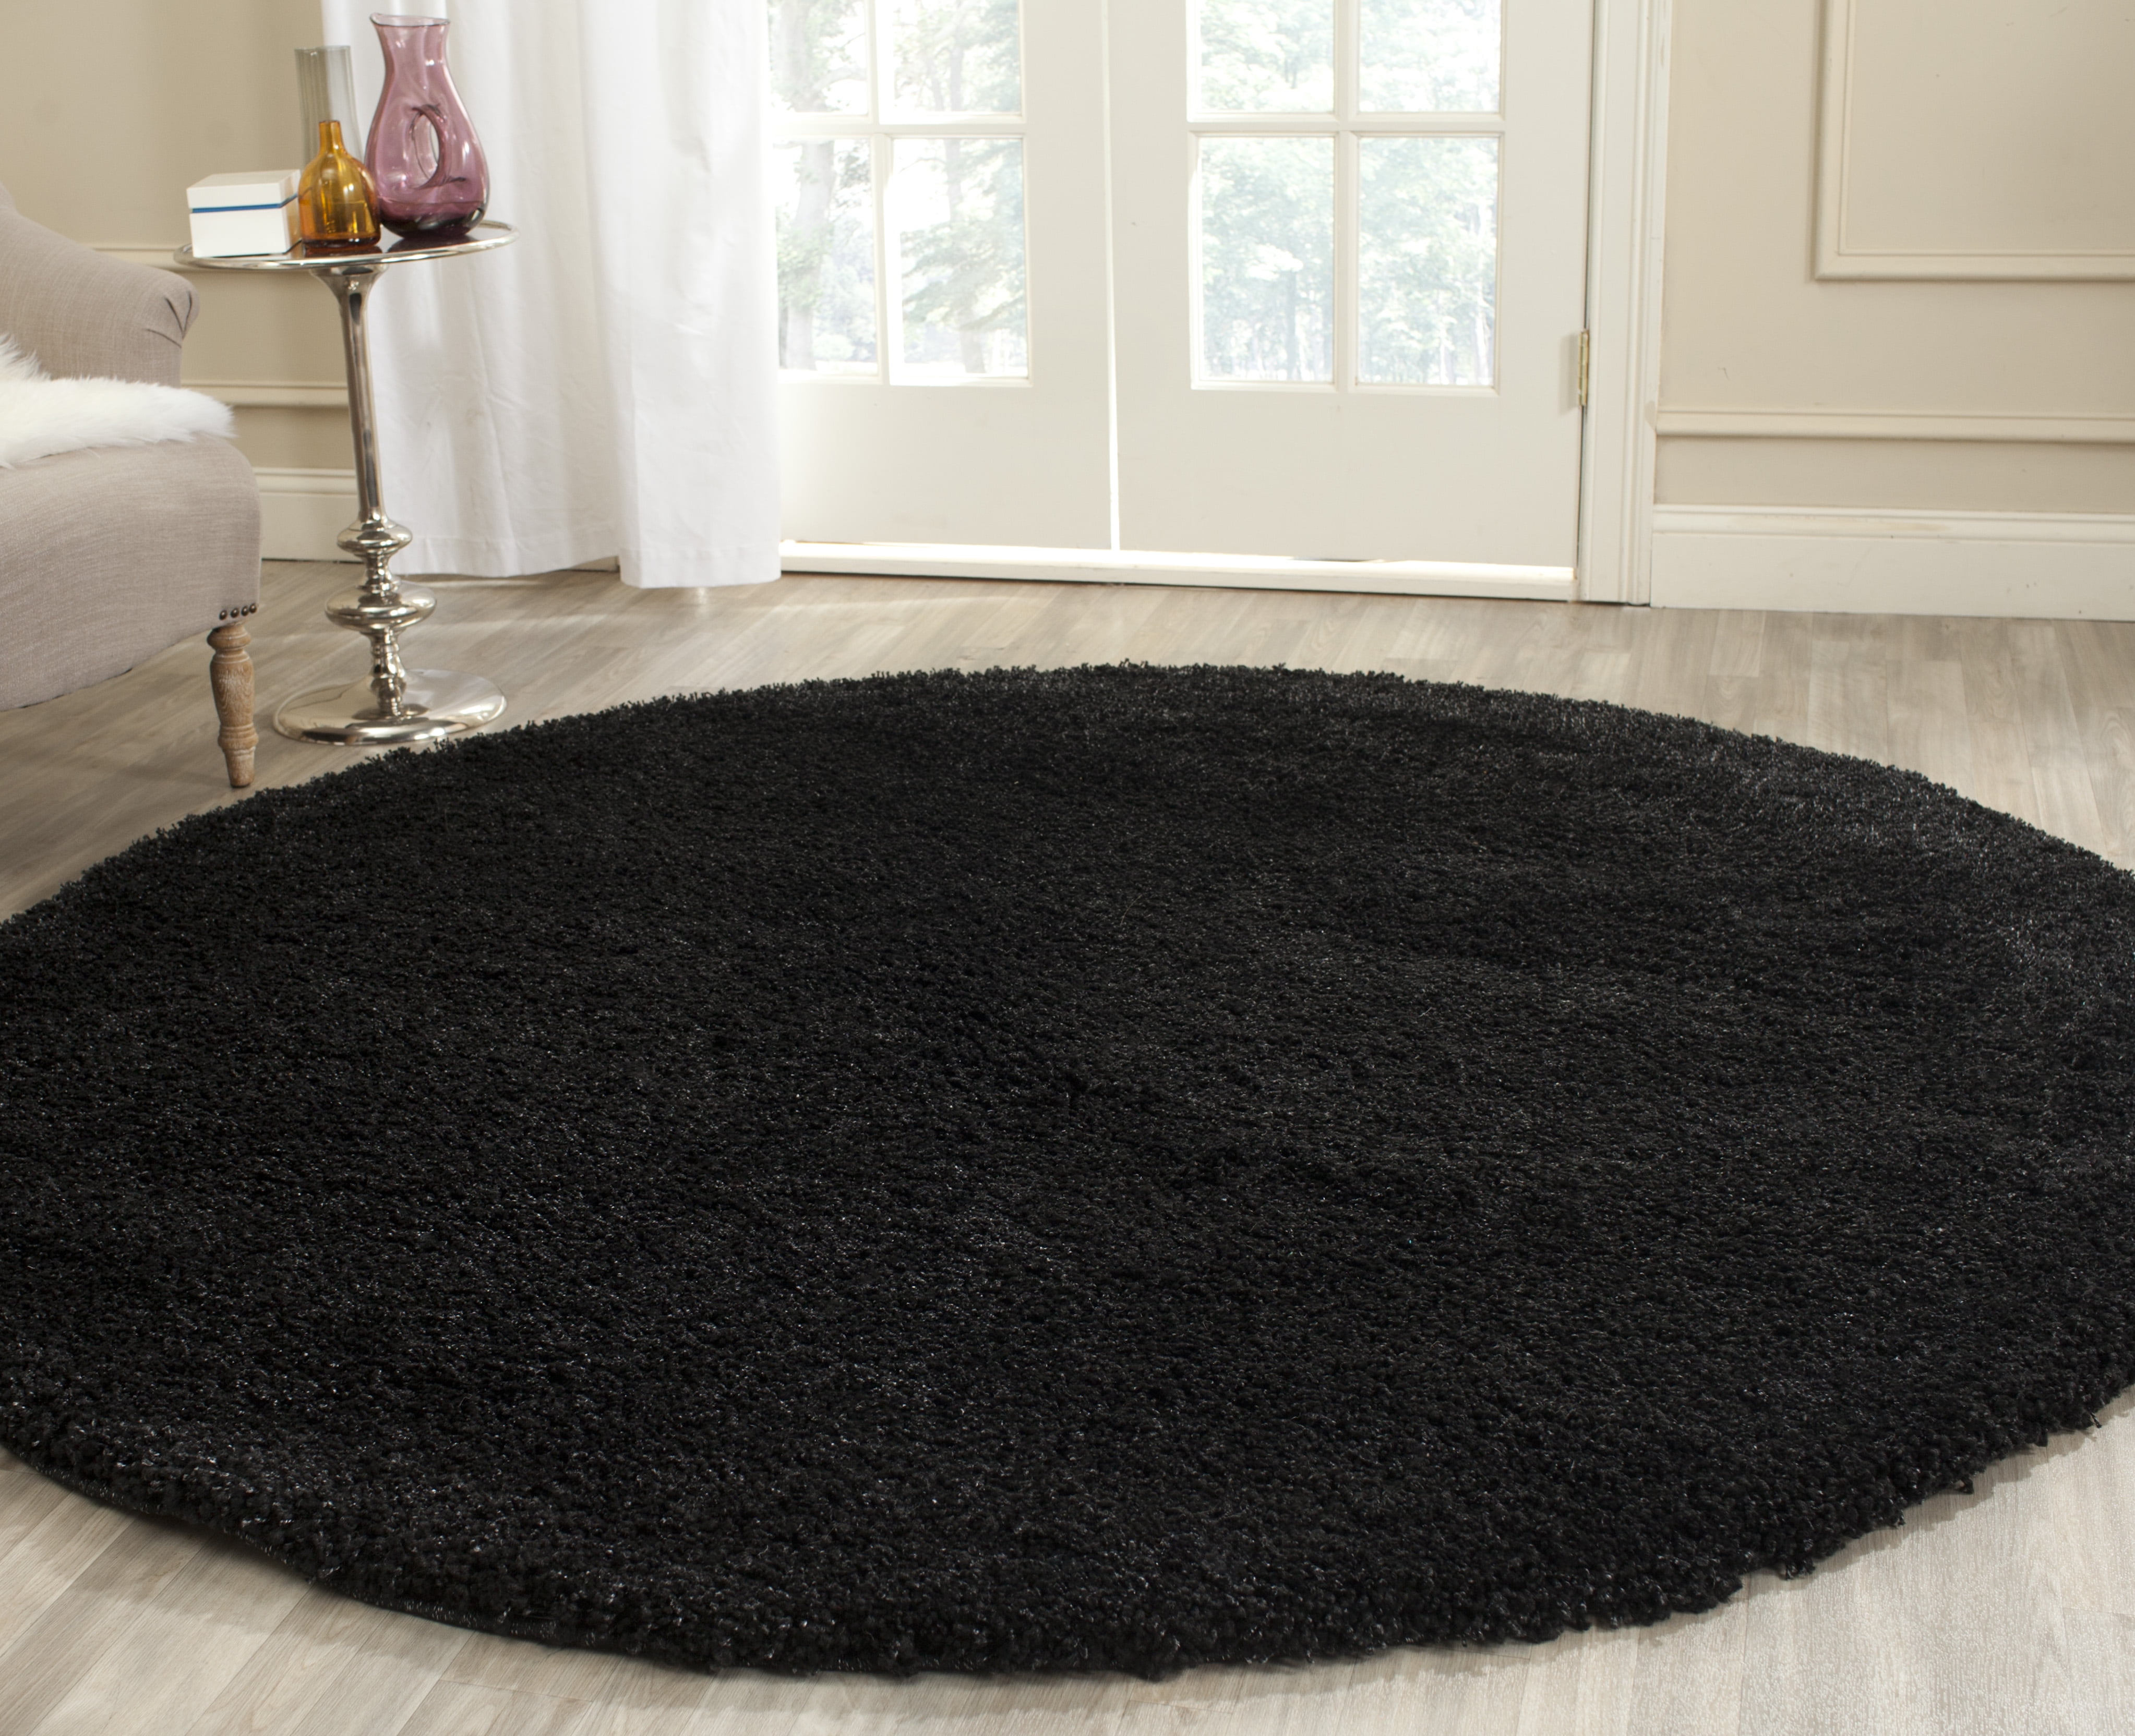 4' Round Shag Area Rug 4 ft Carpet Rugs Solid High Density Plush MANY COLORS! 